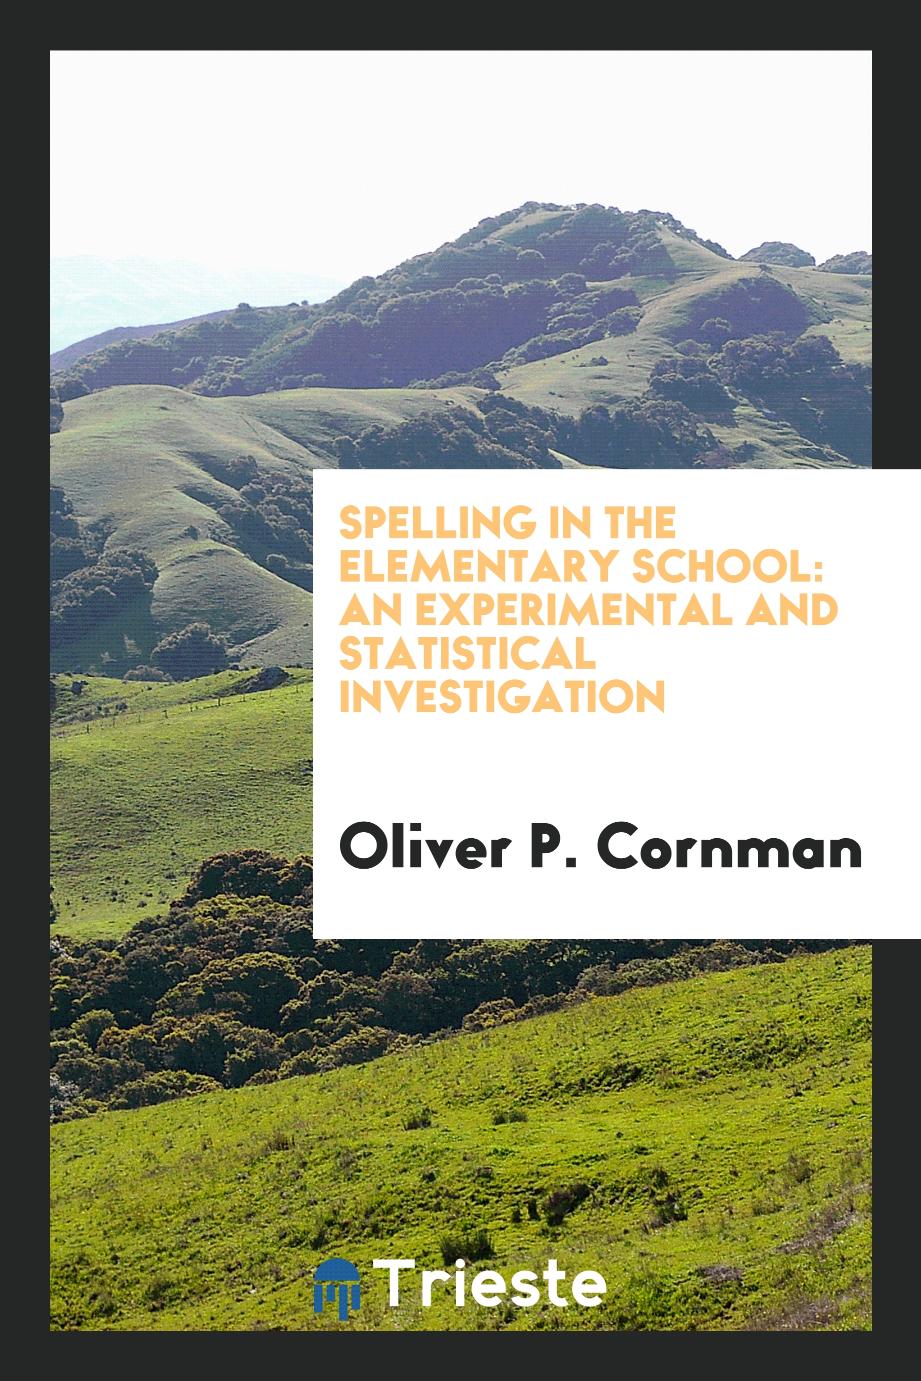 Spelling in the Elementary School: An Experimental and Statistical Investigation